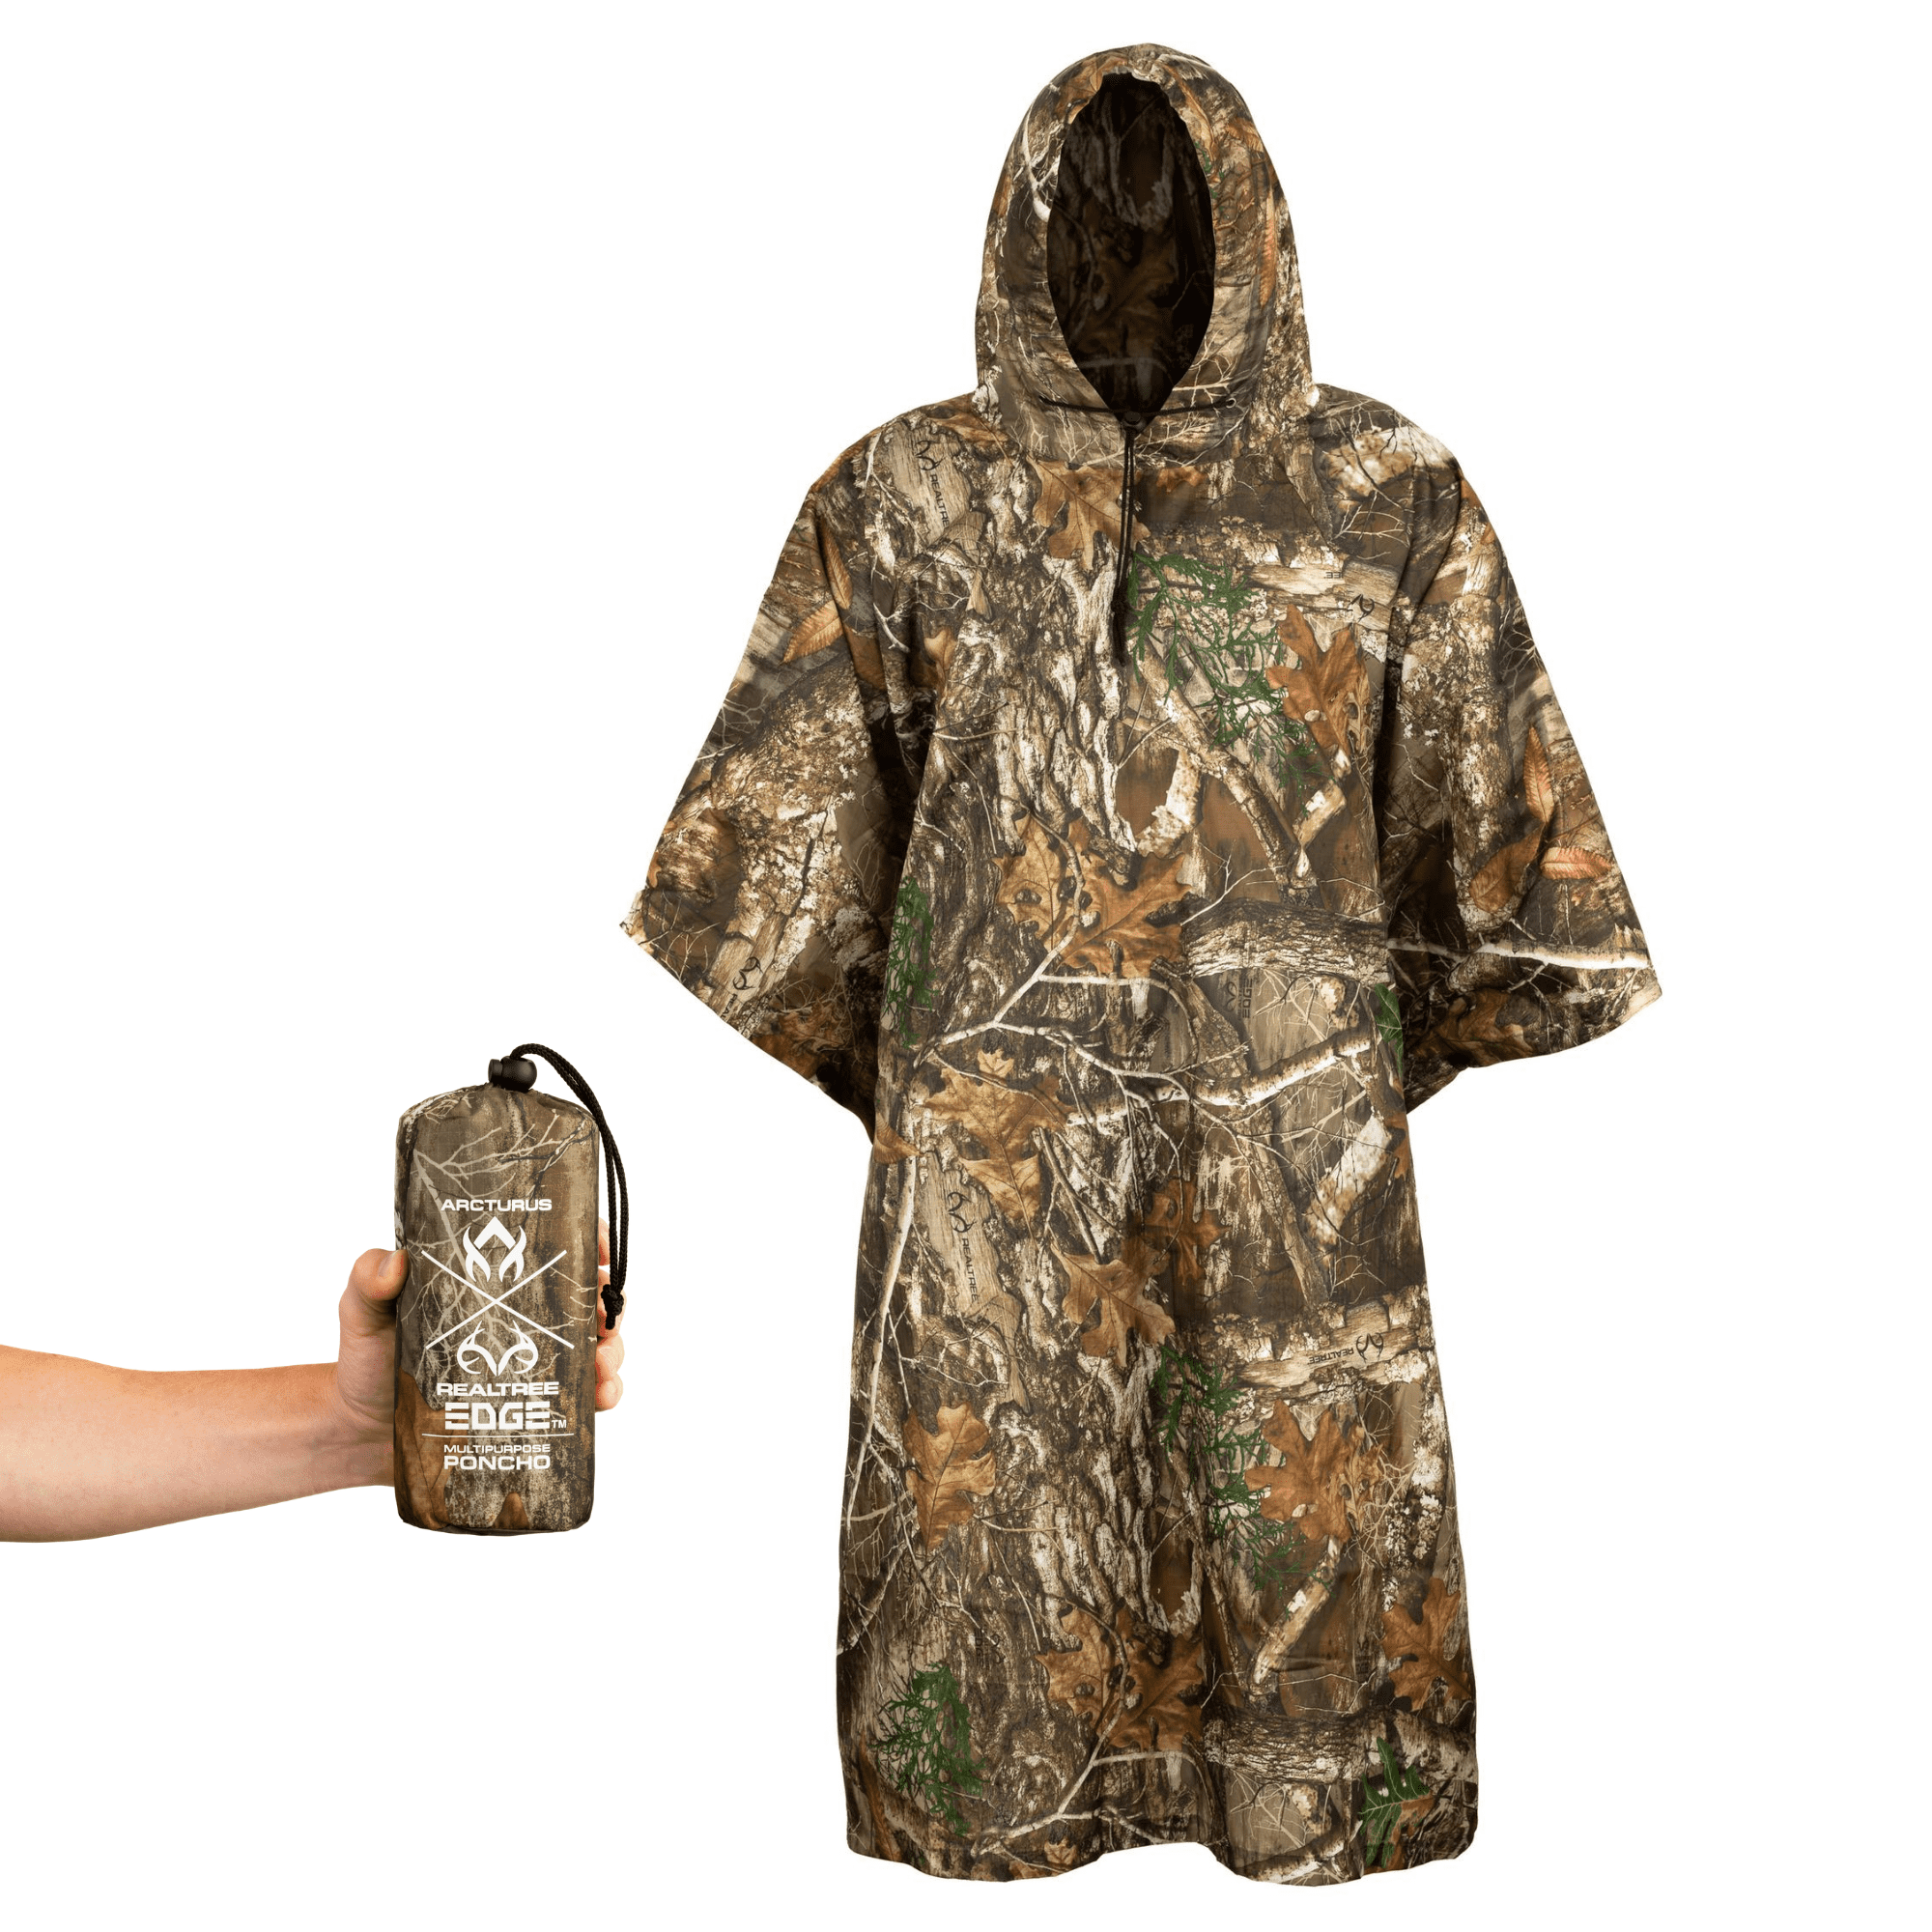 Allen Next G2 Camo Hooded Rain Poncho One Size Hunting Fishing Prepper for sale online 